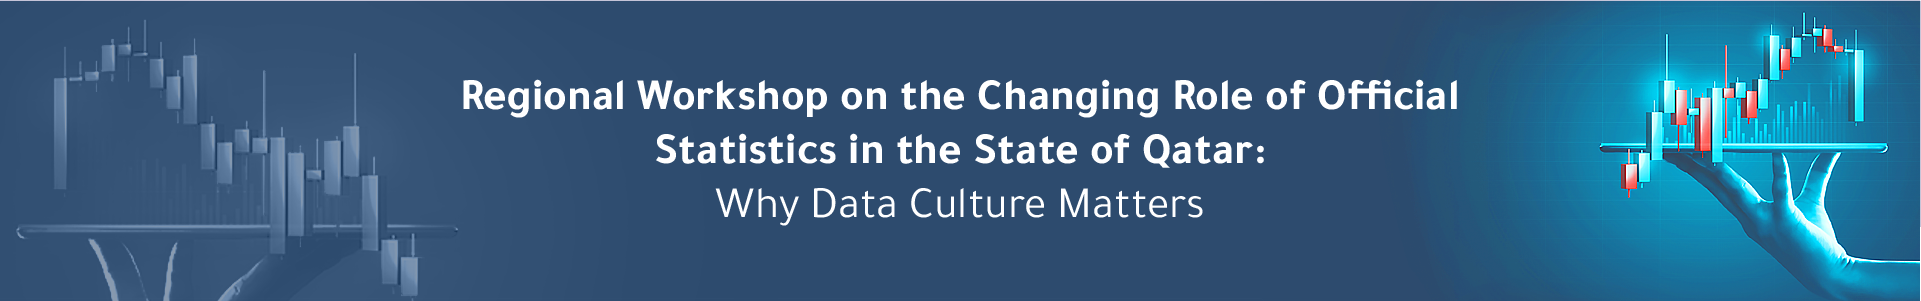 REGIONAL WORKSHOP ON THE CHANGING ROLE OF OFFICIAL STATISTICS IN THE STATE OF QATAR: WHY DATA CULTURE MATTERS